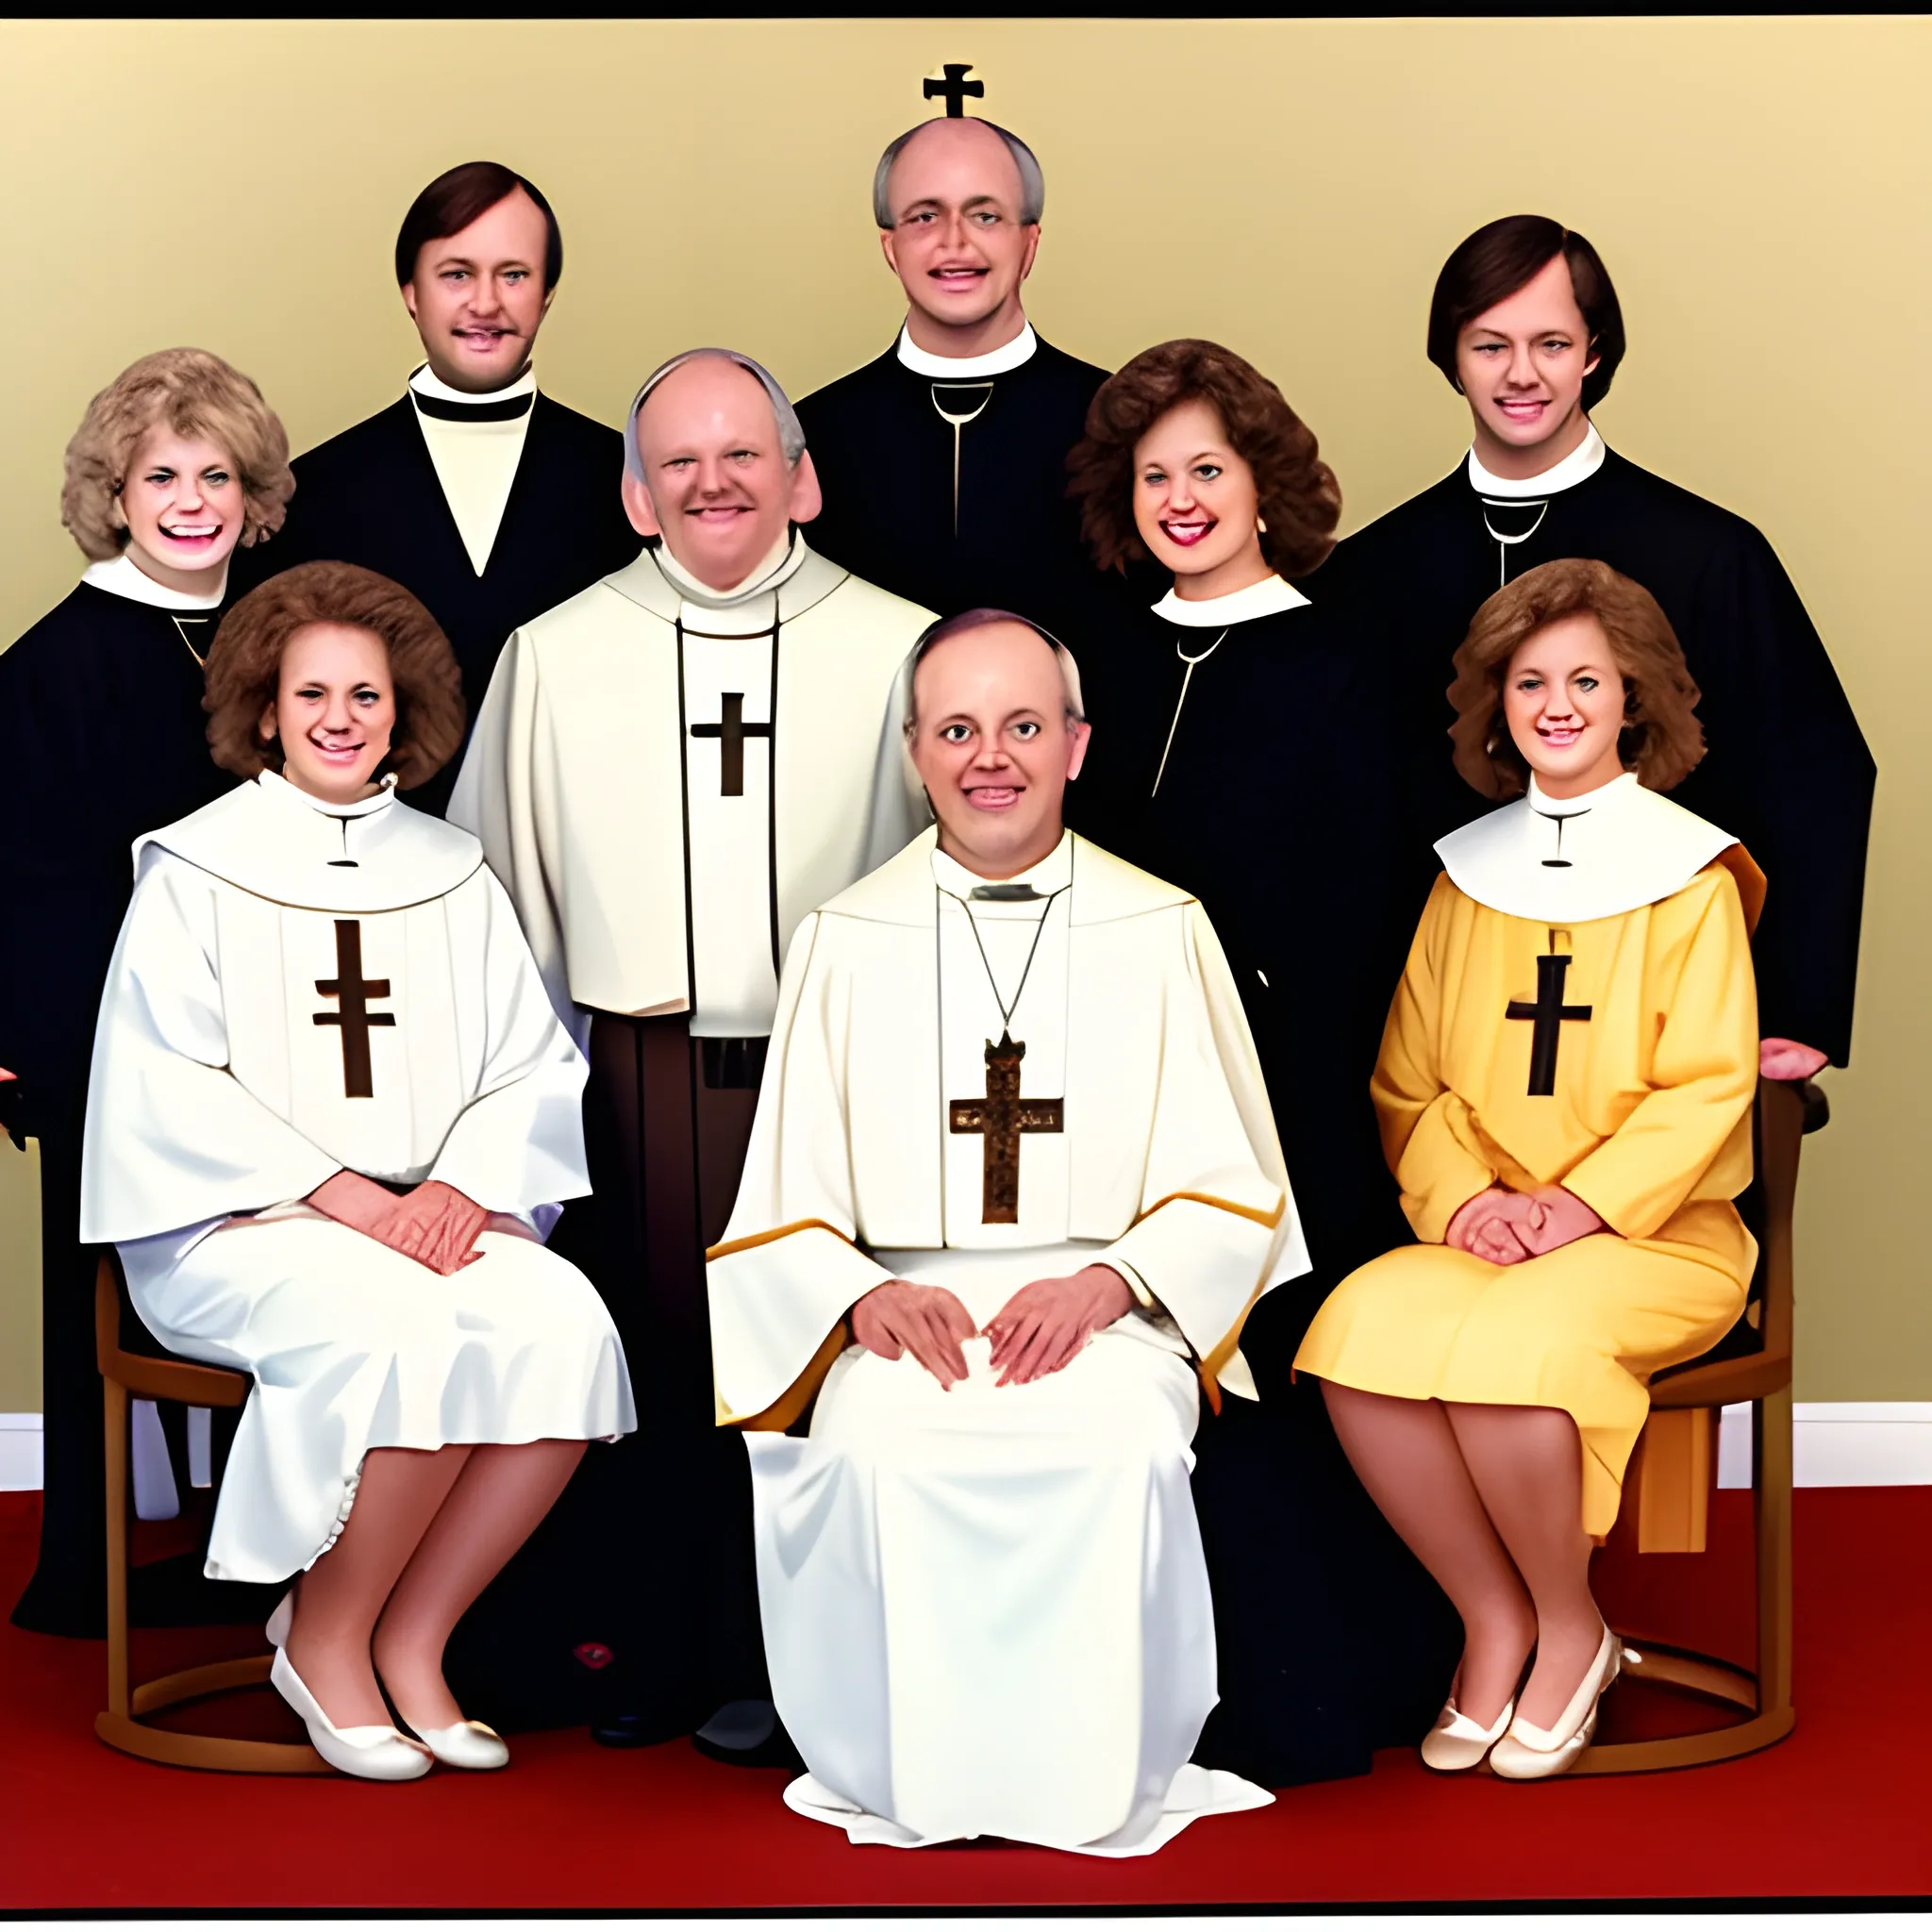 extended family portrait from the 1980s, all the men are priests and all the women are dressed like exotic dancers